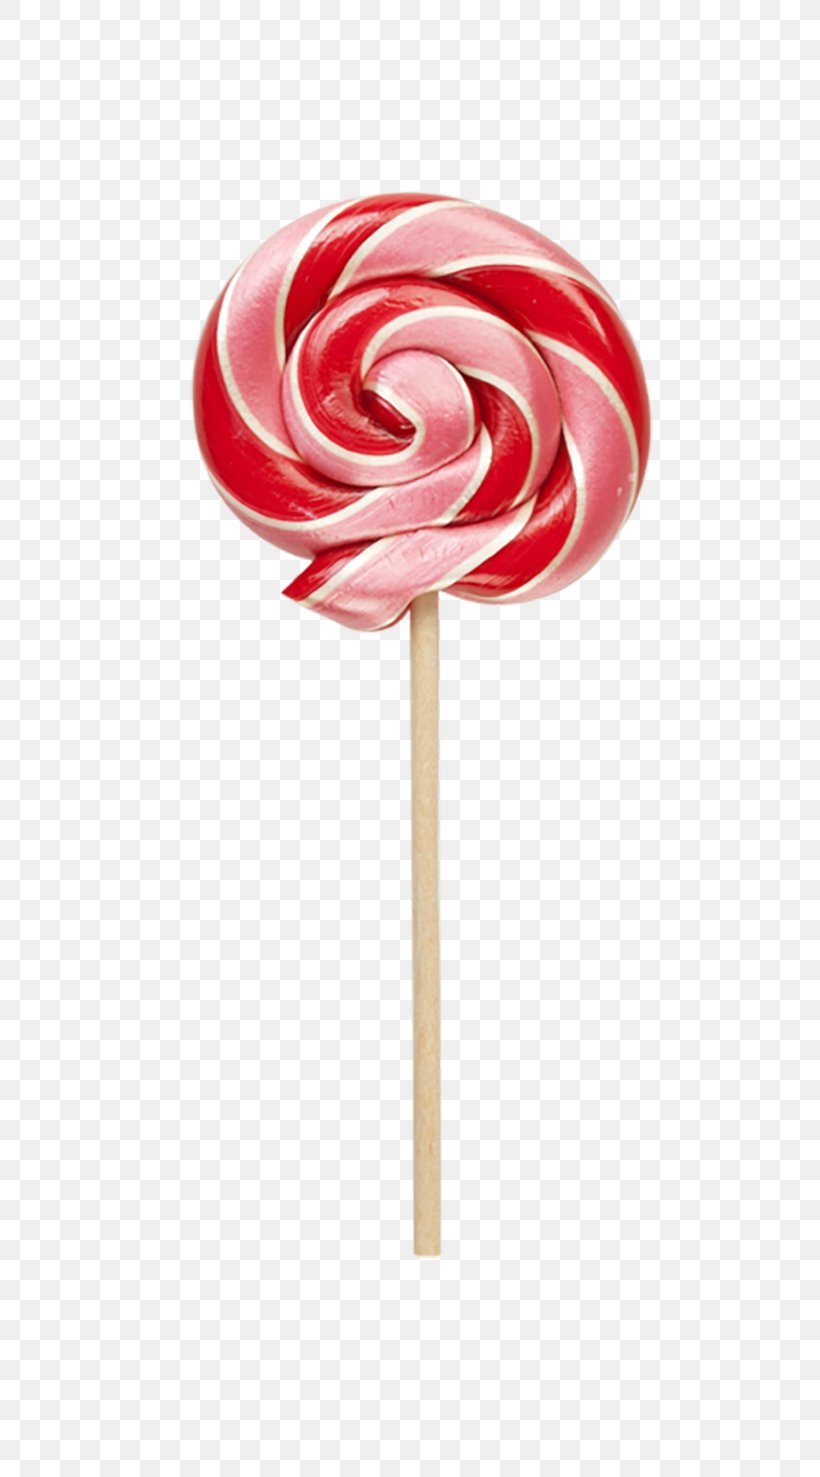 Lollipop Stick Candy Pink Confectionery Candy, PNG, 808x1477px, Lollipop, Candy, Confectionery, Food, Hard Candy Download Free